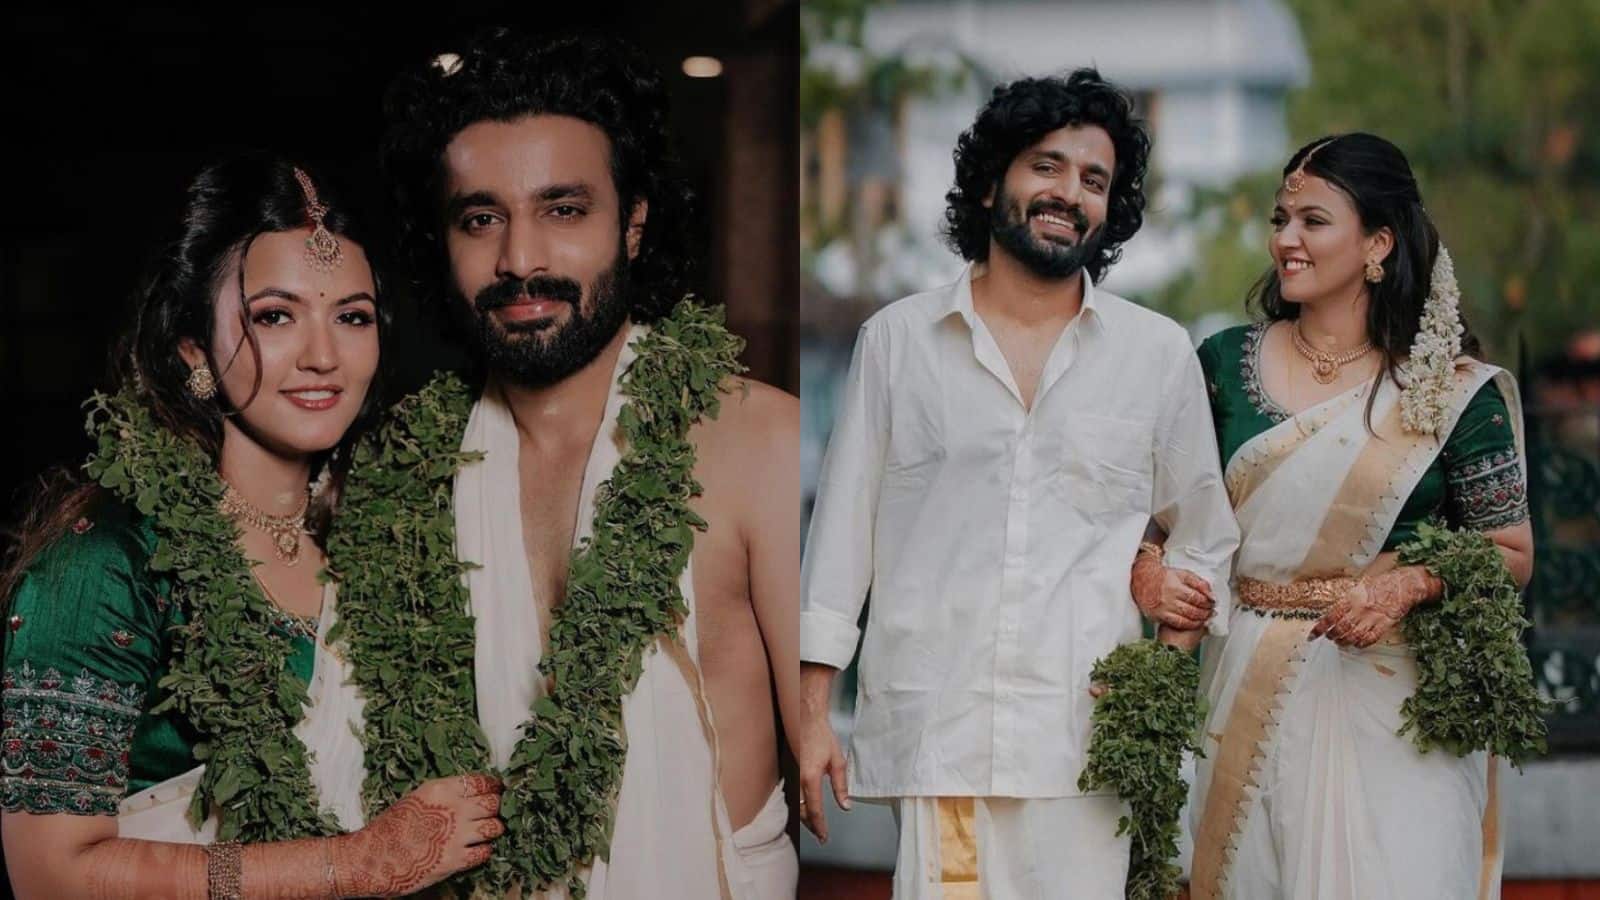 Aparna Das ties the knot with Deepak Parambol; see pictures